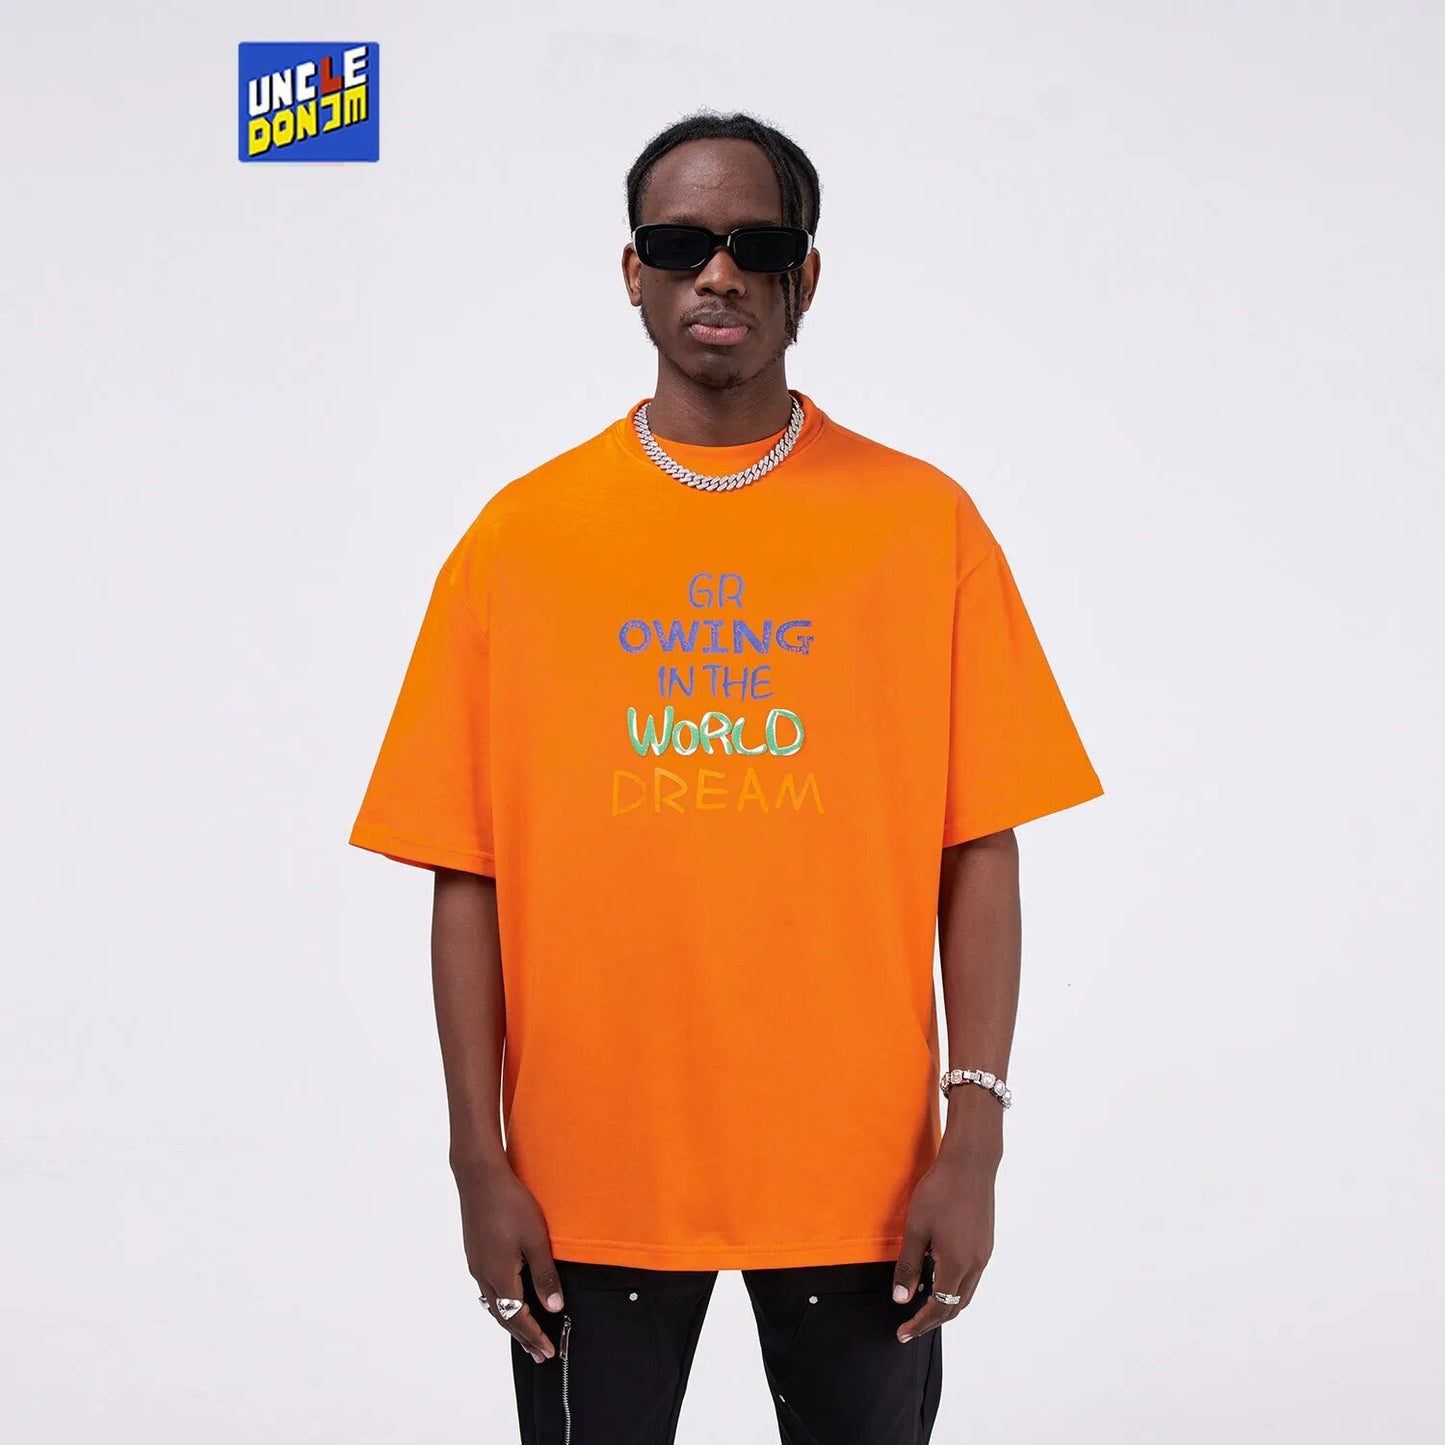 UncleDonJM "Growing In The World" Foam Printed Casual Oversized T-shirt